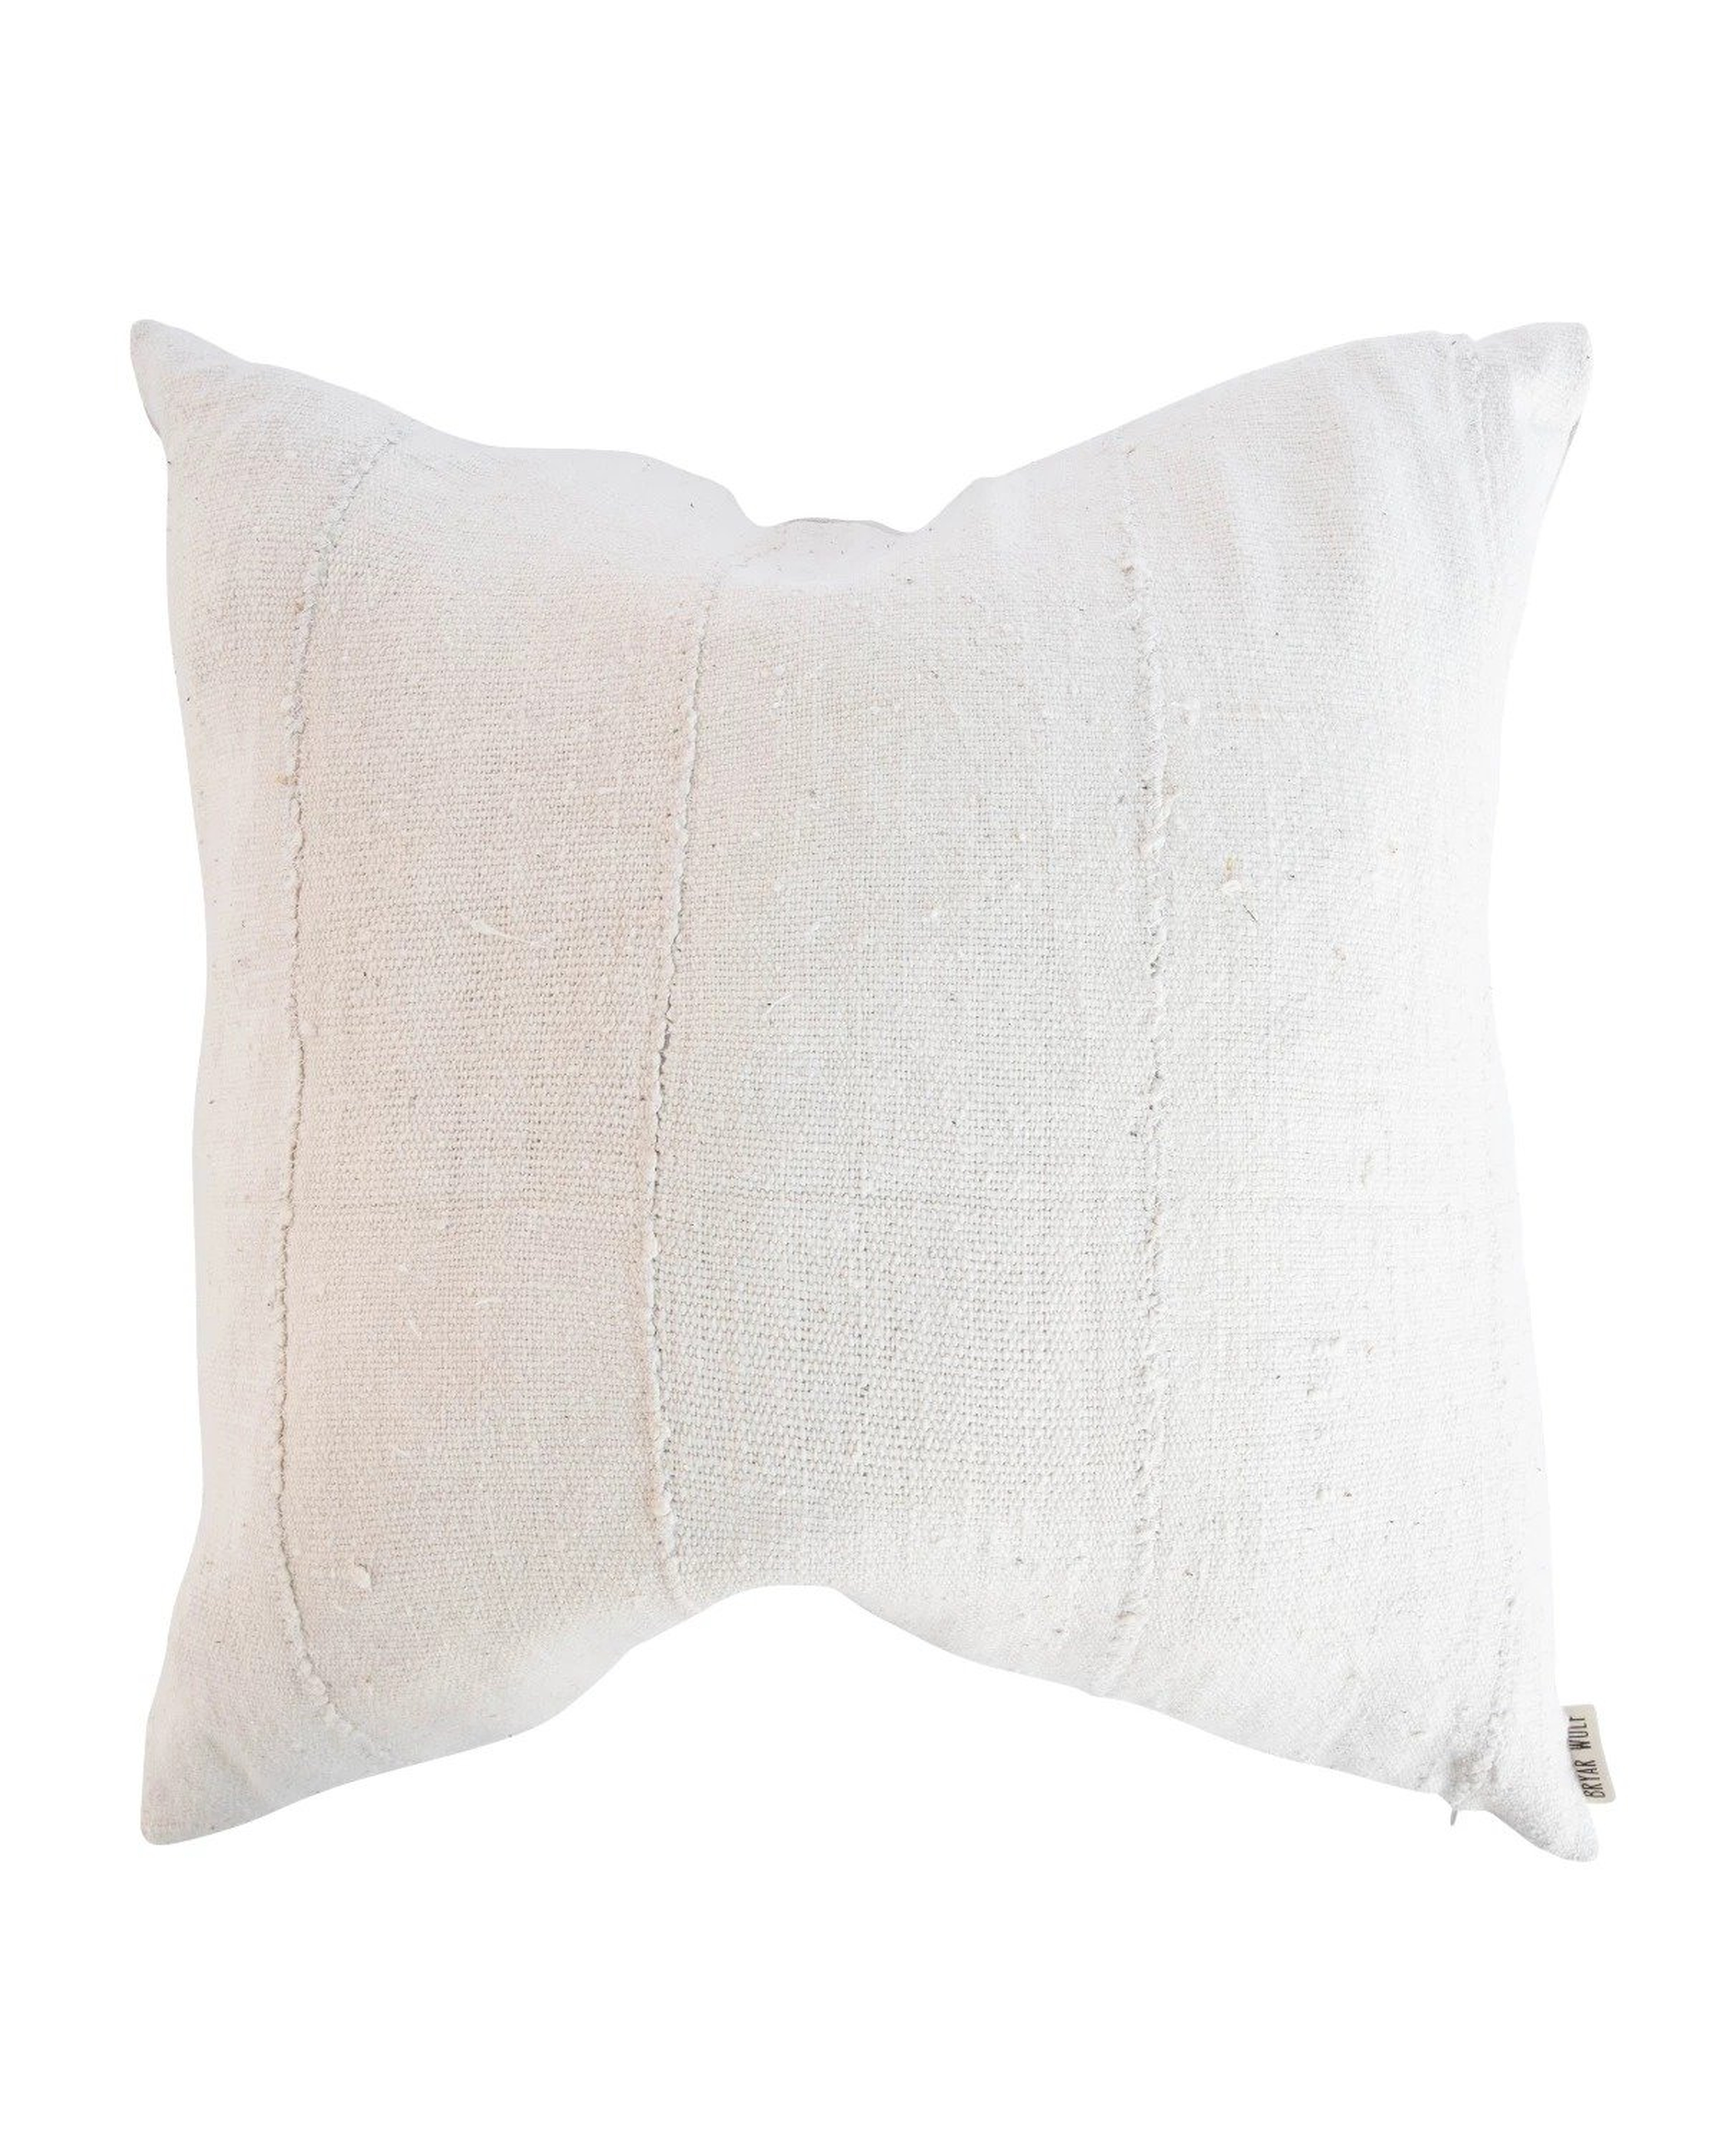 SARA PILLOW WITH INSERT, 20" x 20" - McGee & Co.